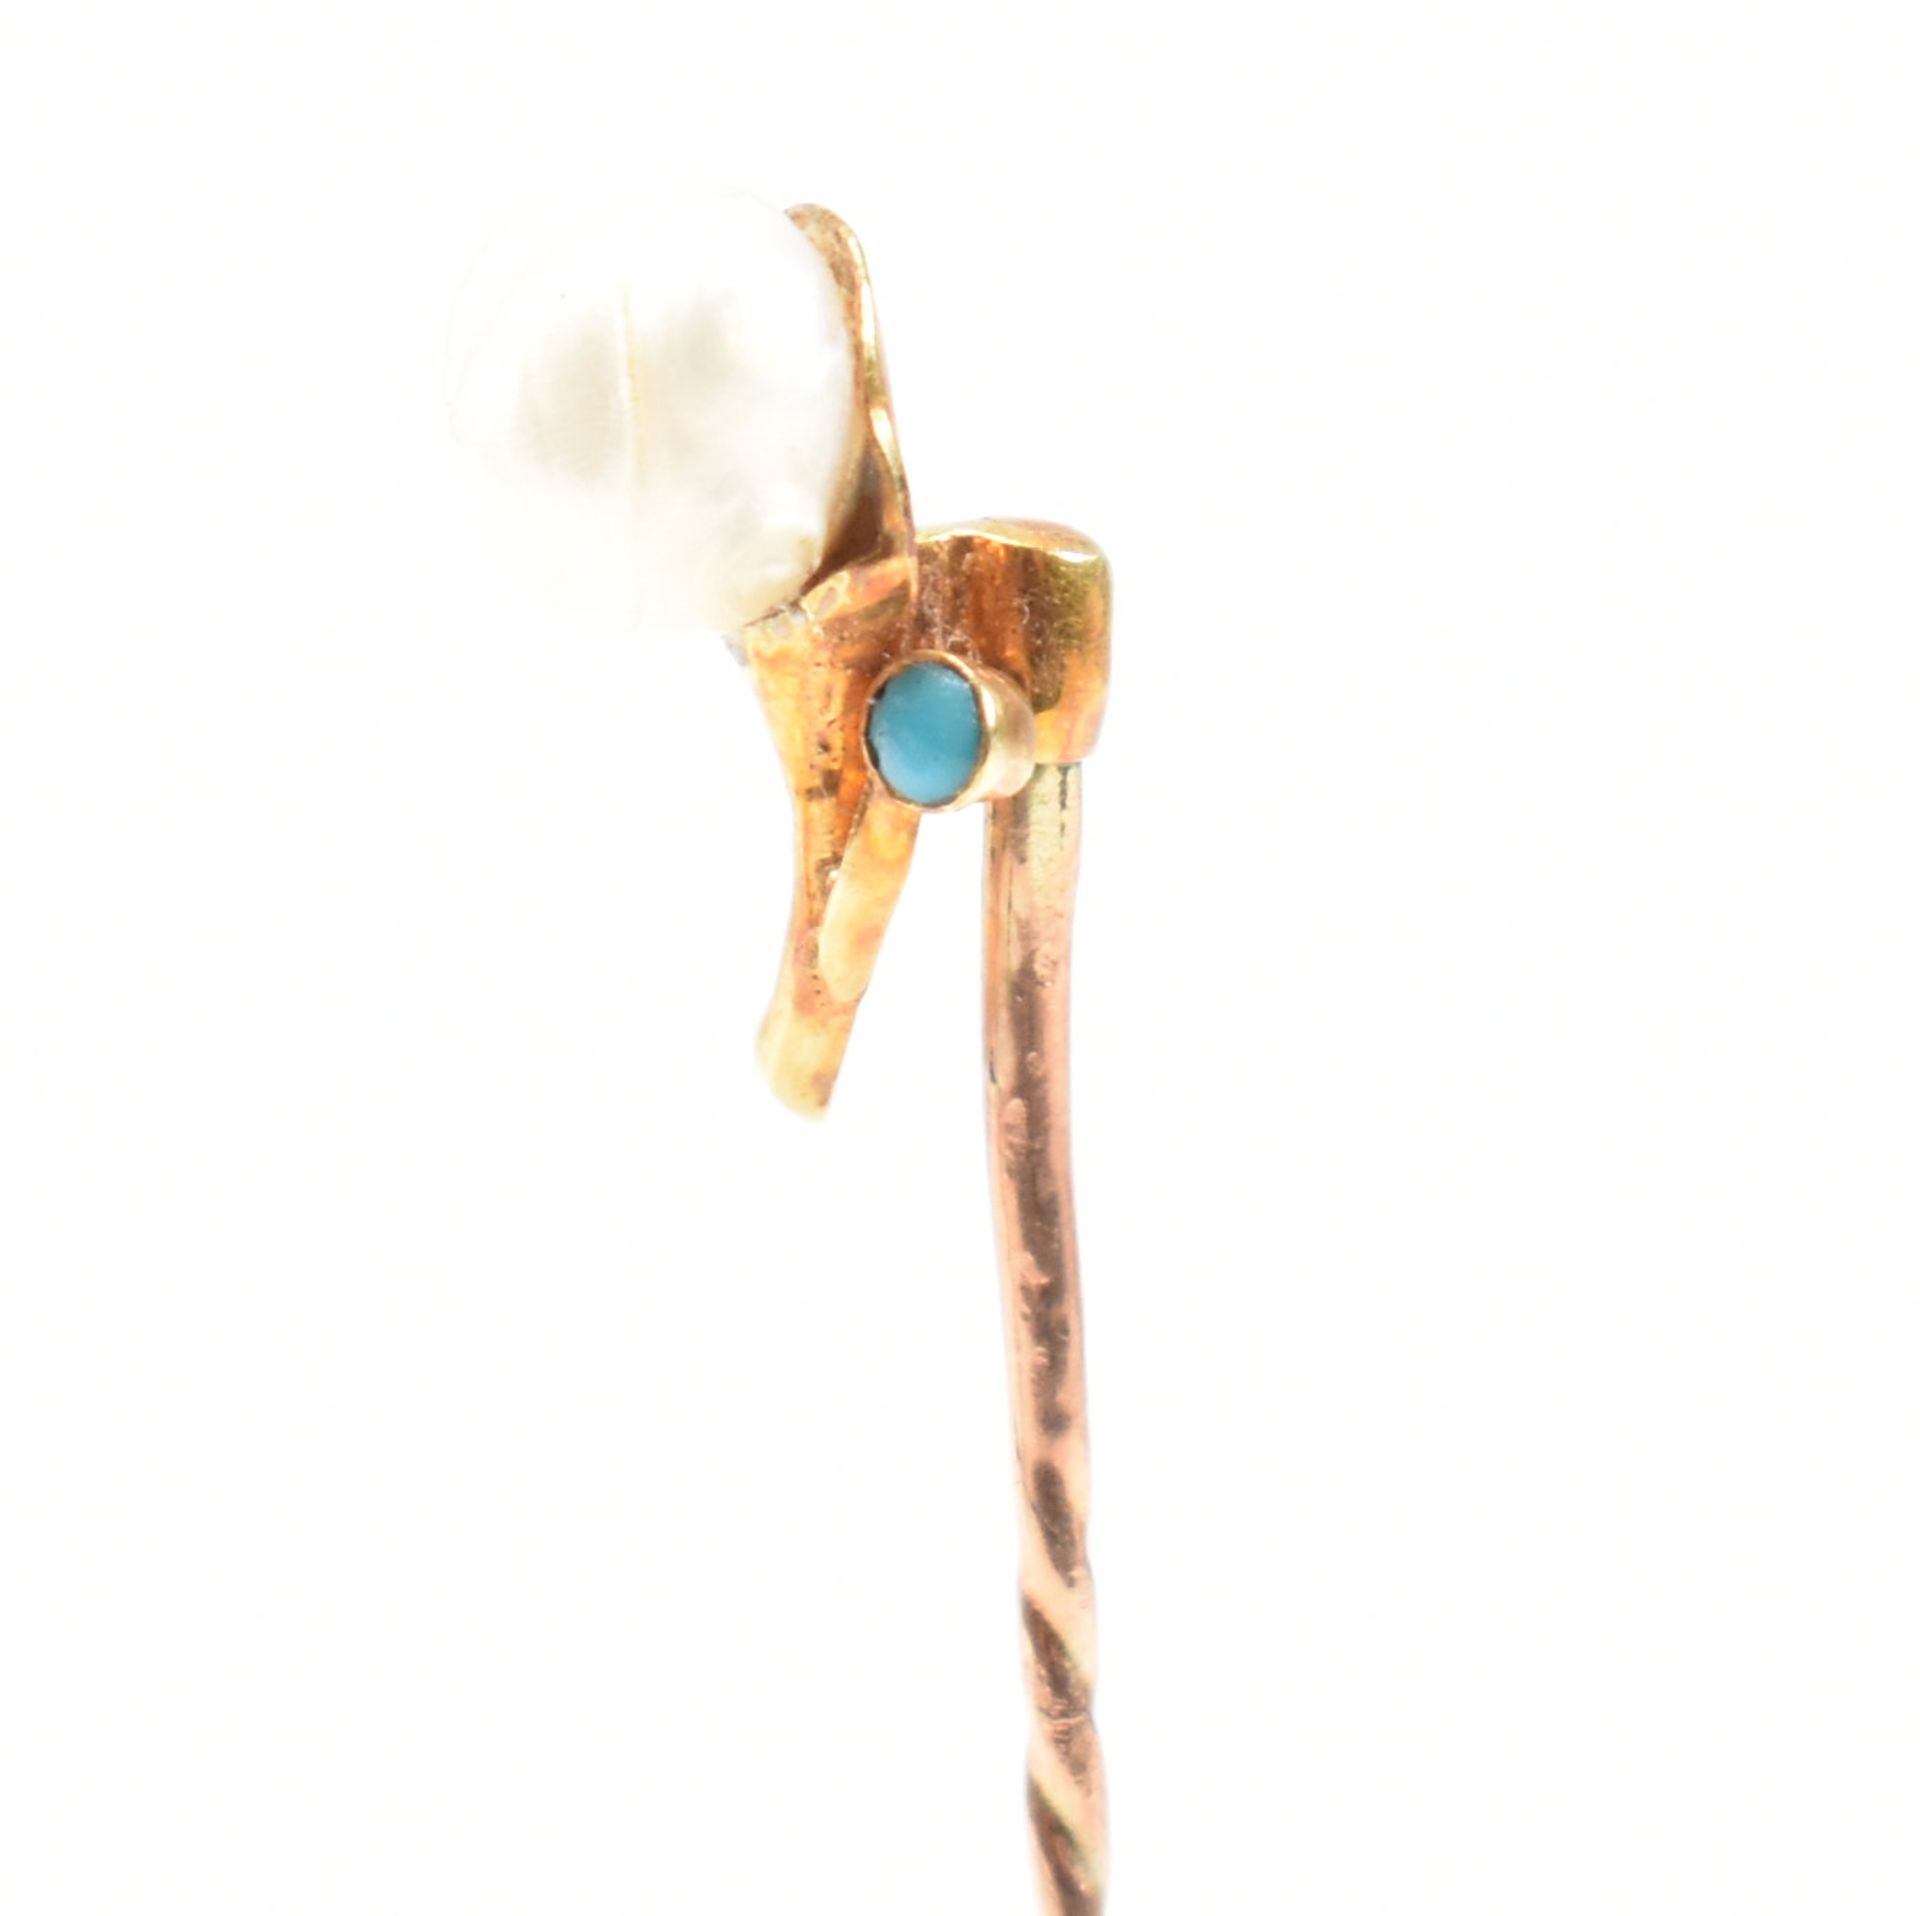 CASED 19TH CENTURY PEARL & TURQUOISE STICK PIN - Image 7 of 10